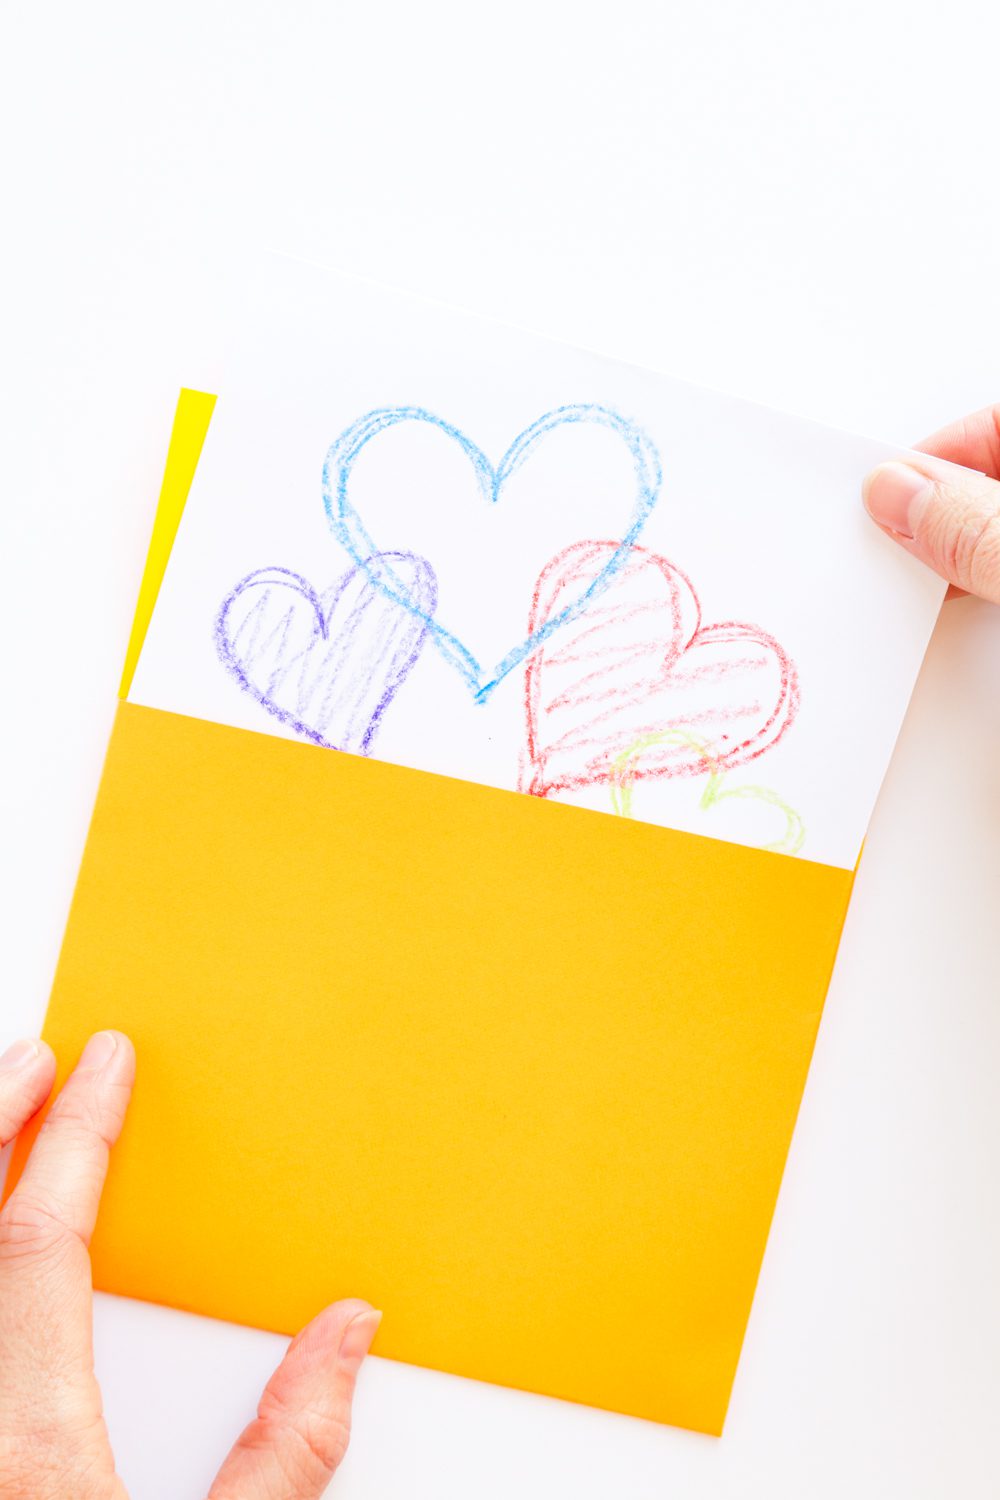 Pulling a card with colorful hearts from a yellow handmade square envelope.